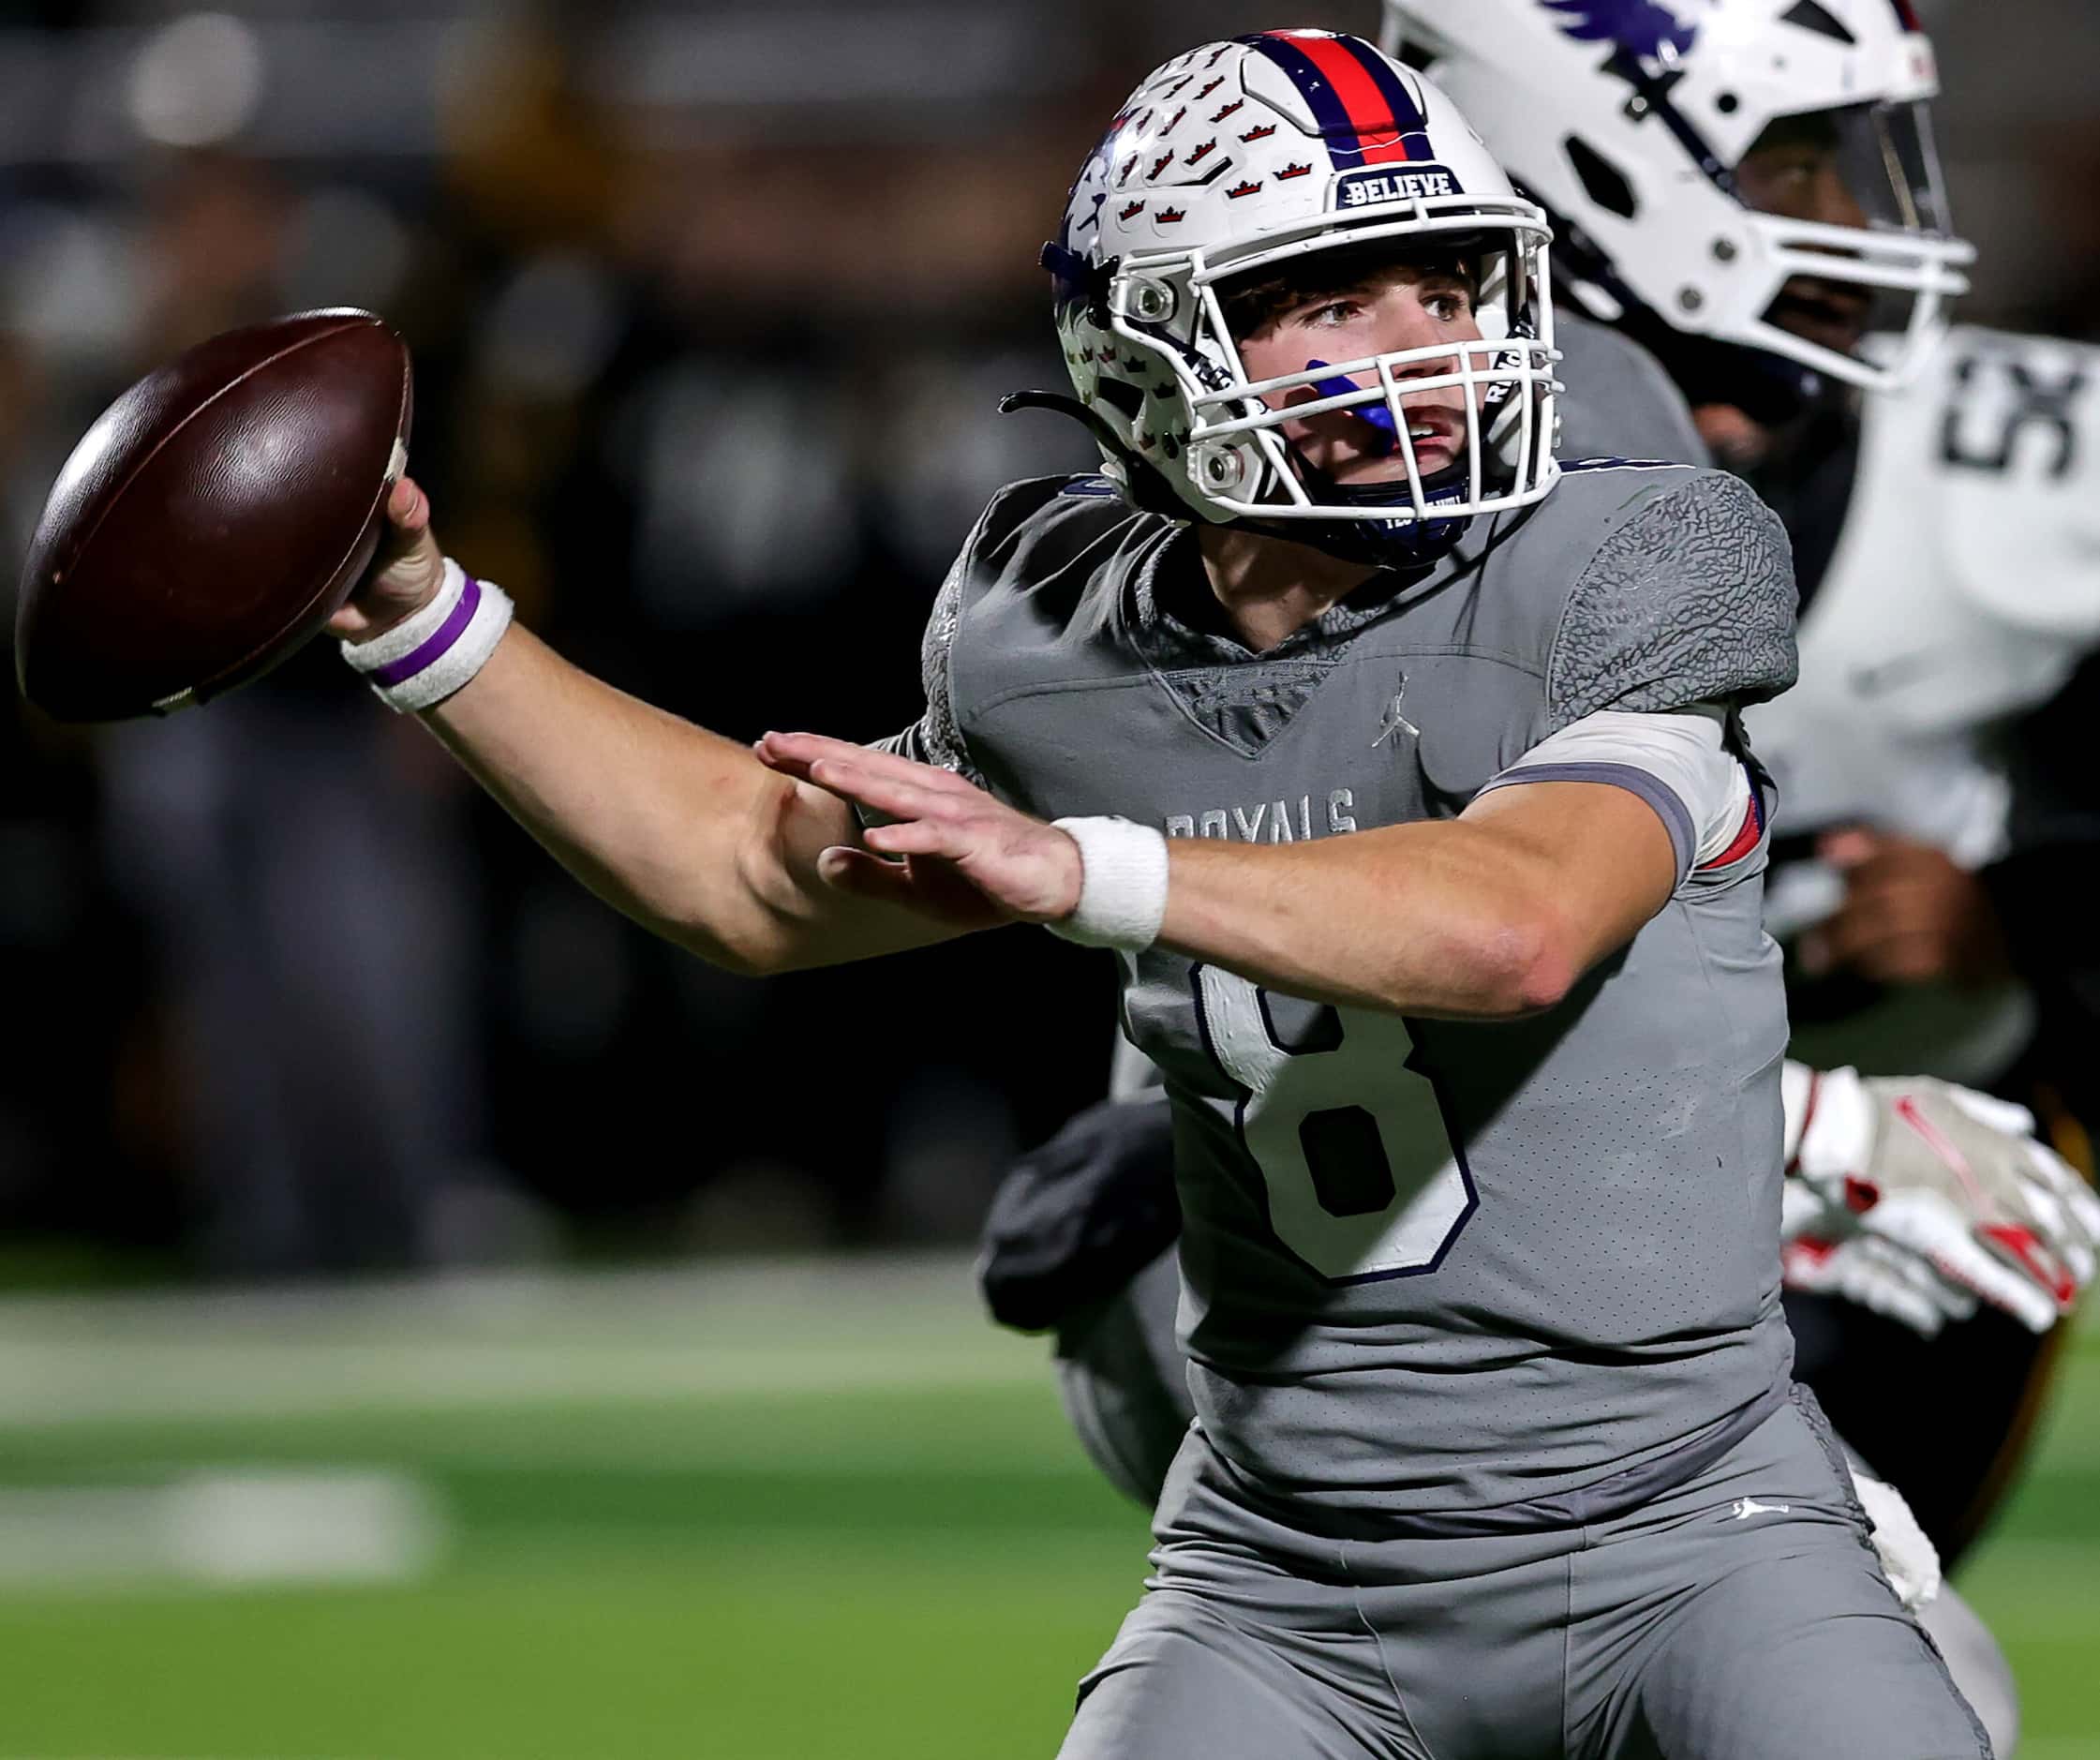 Richland quarterback Drew Kates looks to pass against Forney during the first half of the...